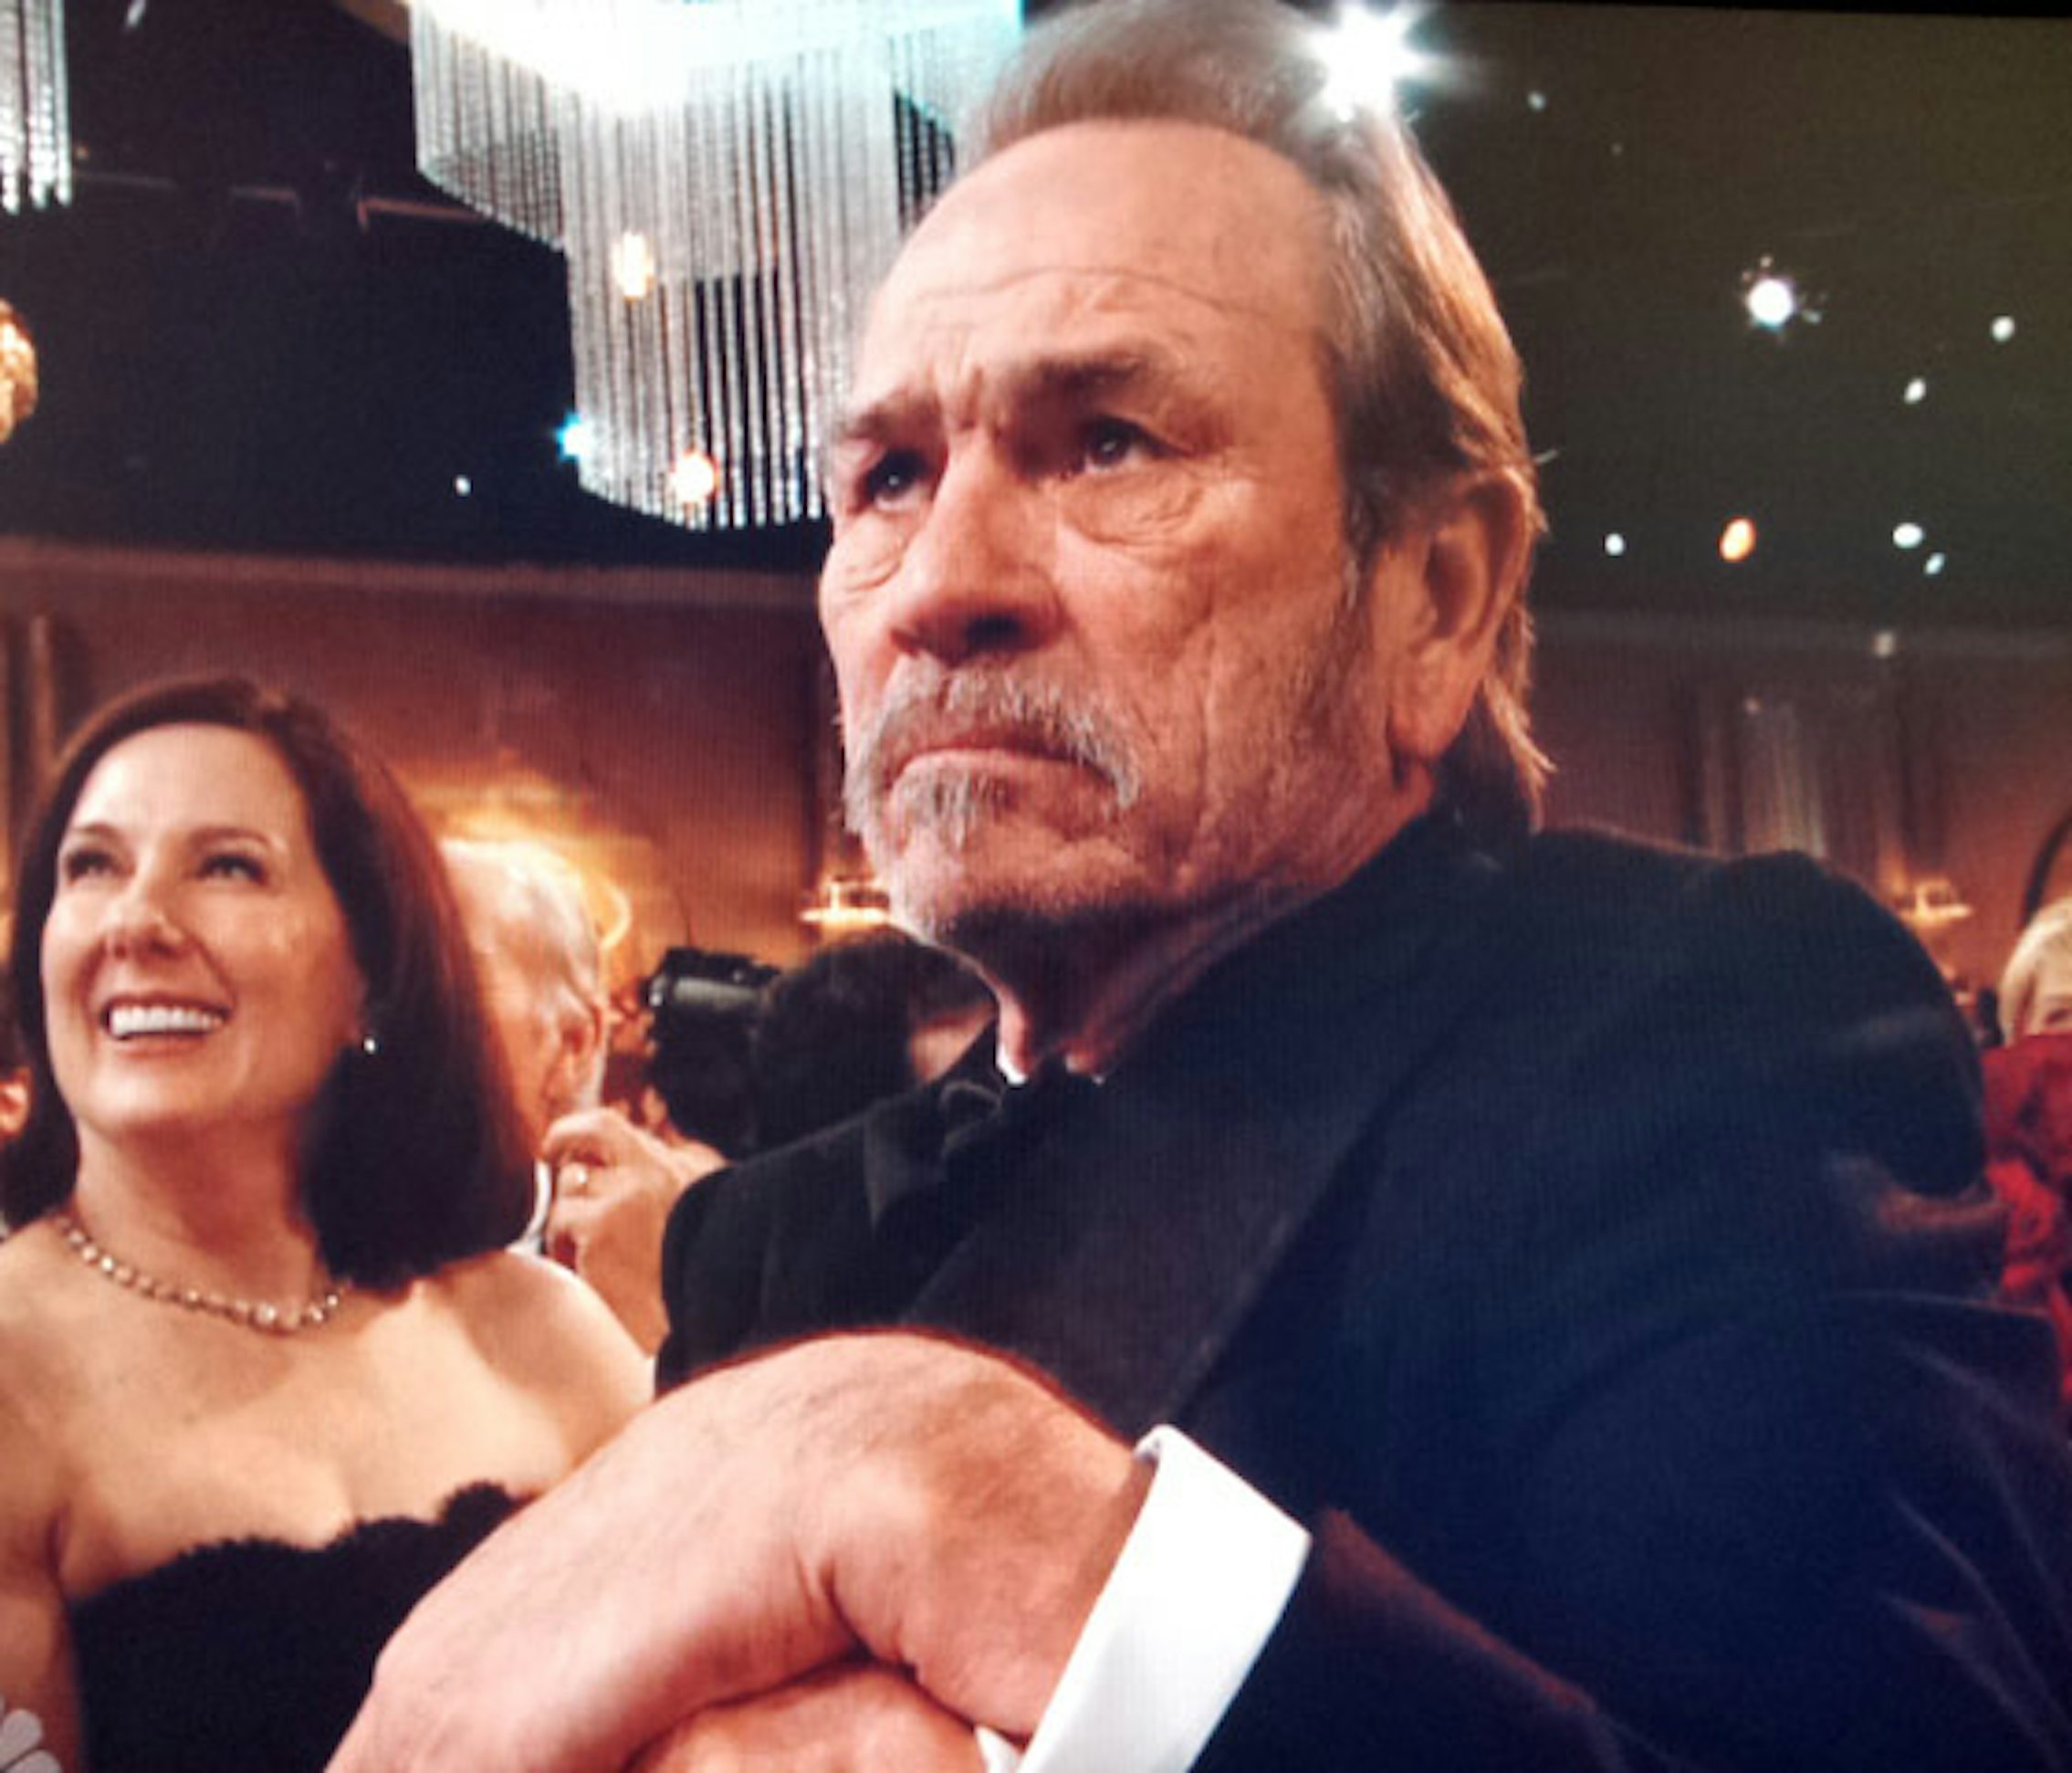 Give Tommy Lee Jones the Golden Globe for 